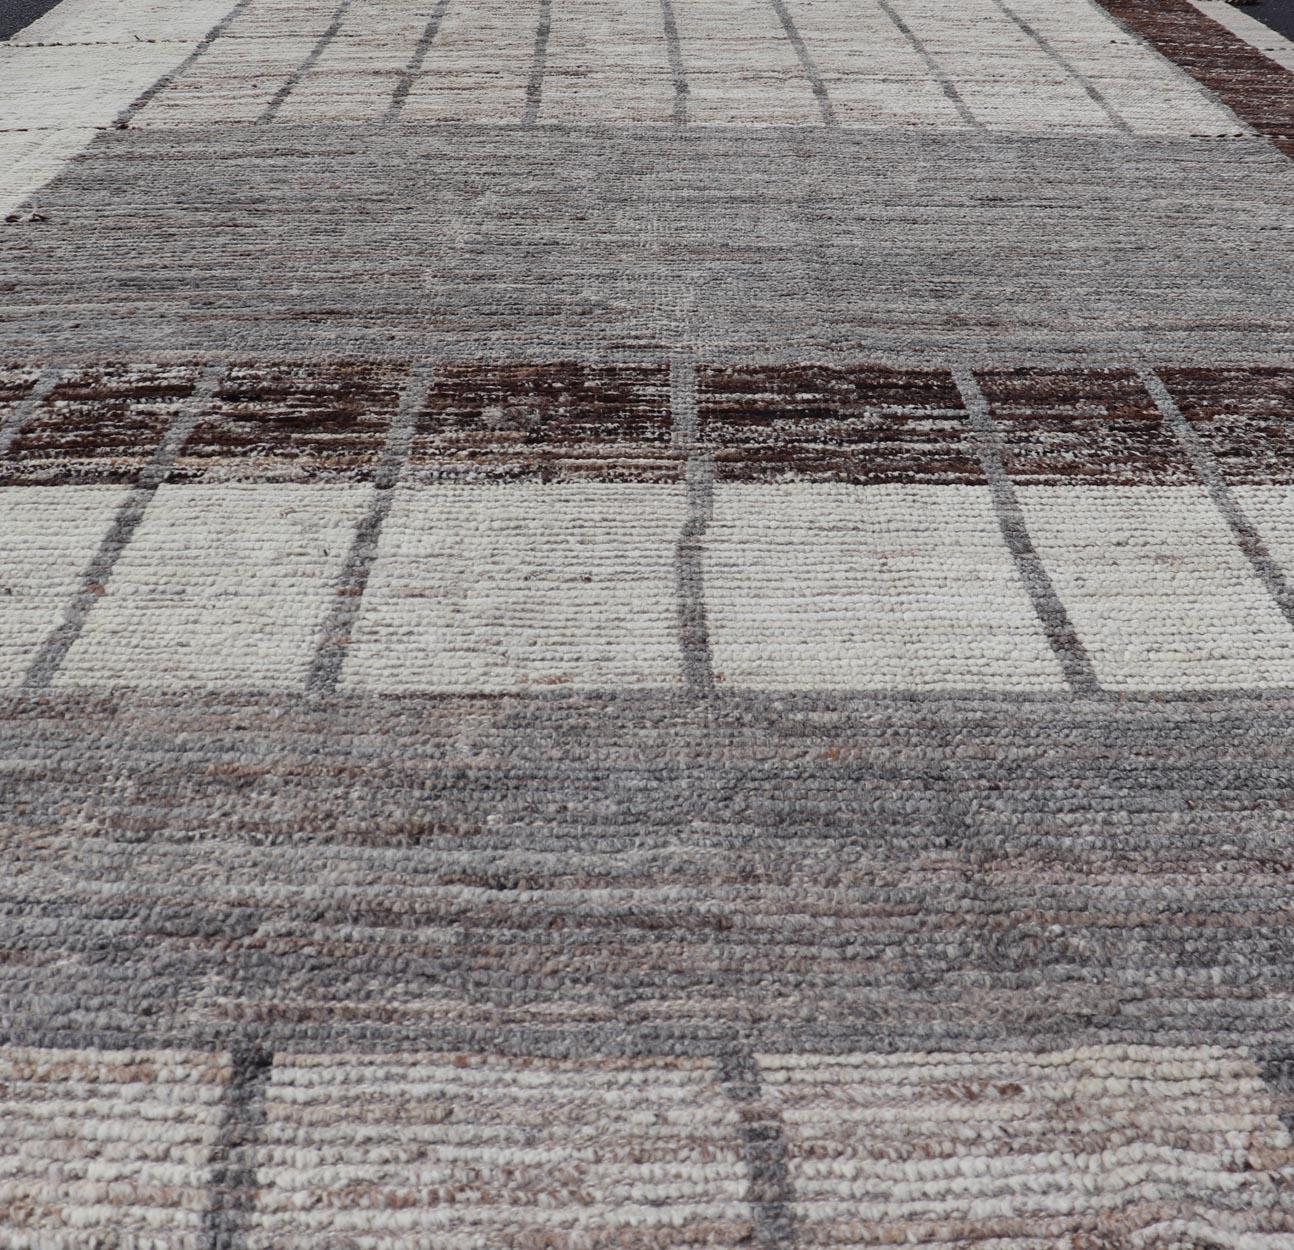 Afghan Abstract Modern Rug in Earth Tones with Unique Design With Natural Gray. Keivan Woven Arts; AFG-64378   Country of Origin: Afghanistan  Type: Modern Casual  Design: Abstract, Geometric, Minimalist.
Measures: 6'9 x 11'1 
Modern Rug in Earth